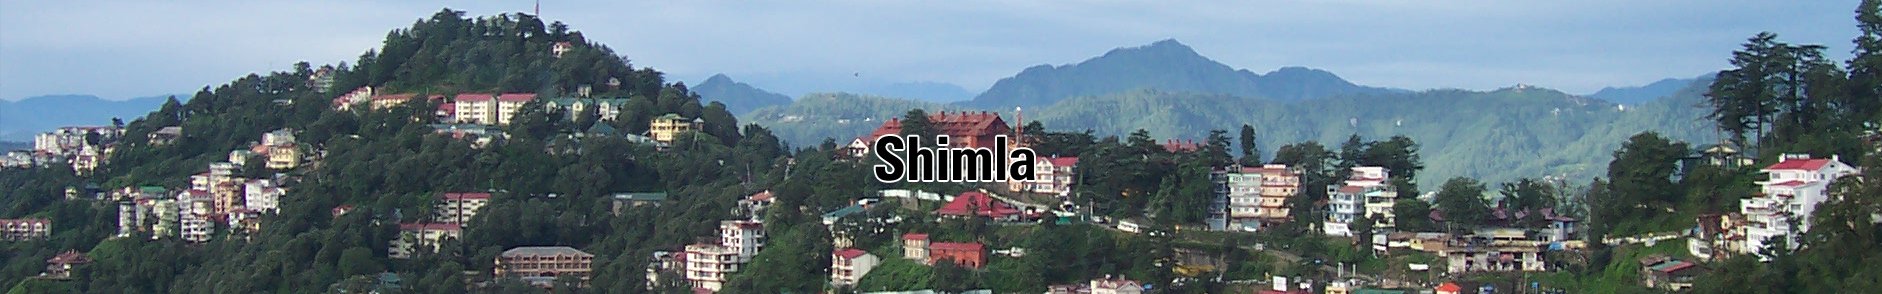 Shimla Hill Stations Holiday Packages